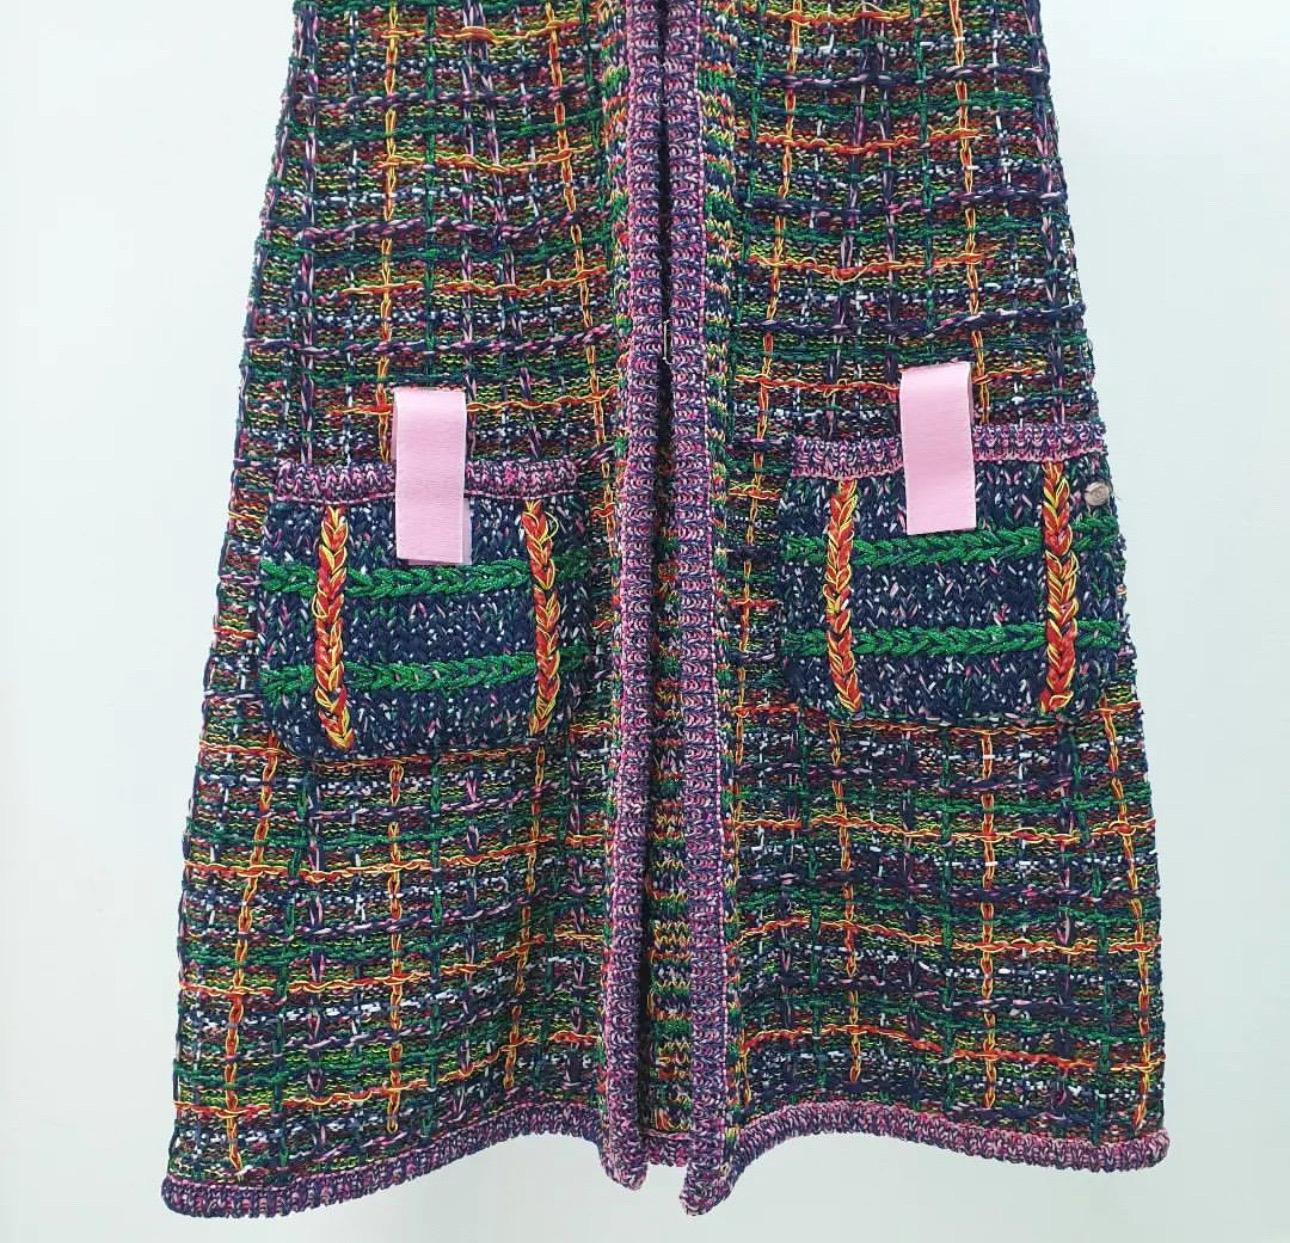 Runway multicolour tweed long hooded vest jacket from 2017 spring (Techno) Collection by Karl Lagerfeld.
 Very rare and sought for. 
Size 40
CC logo adornment at hip
Two front patch pockets with velcro fastening 
Condition is excellent